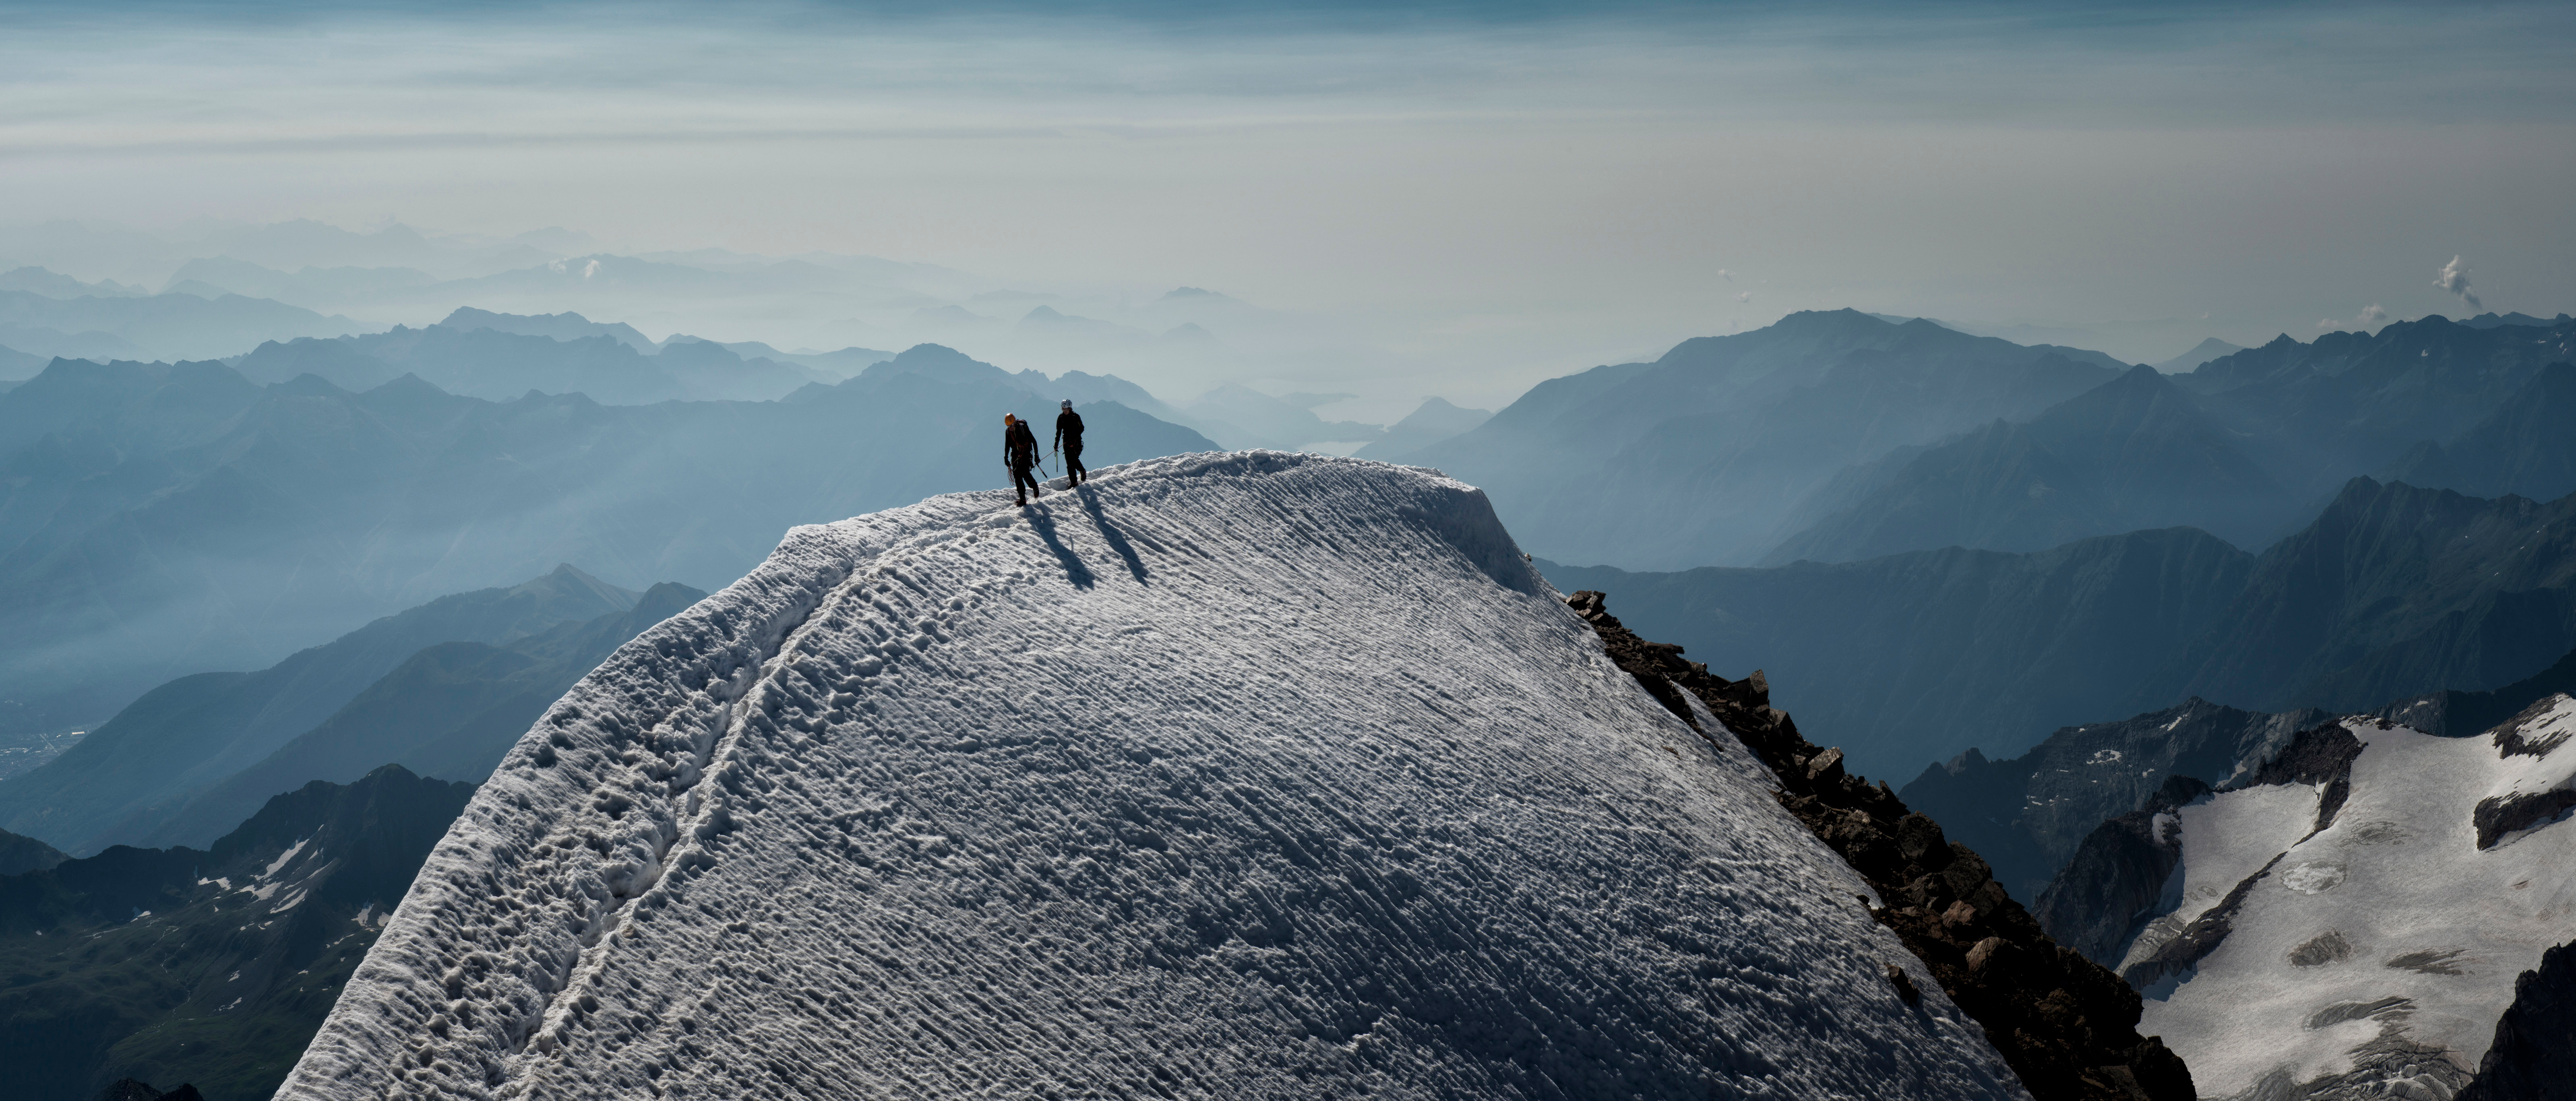 Mountain climbers on the top of snow covered mountains (Alps)